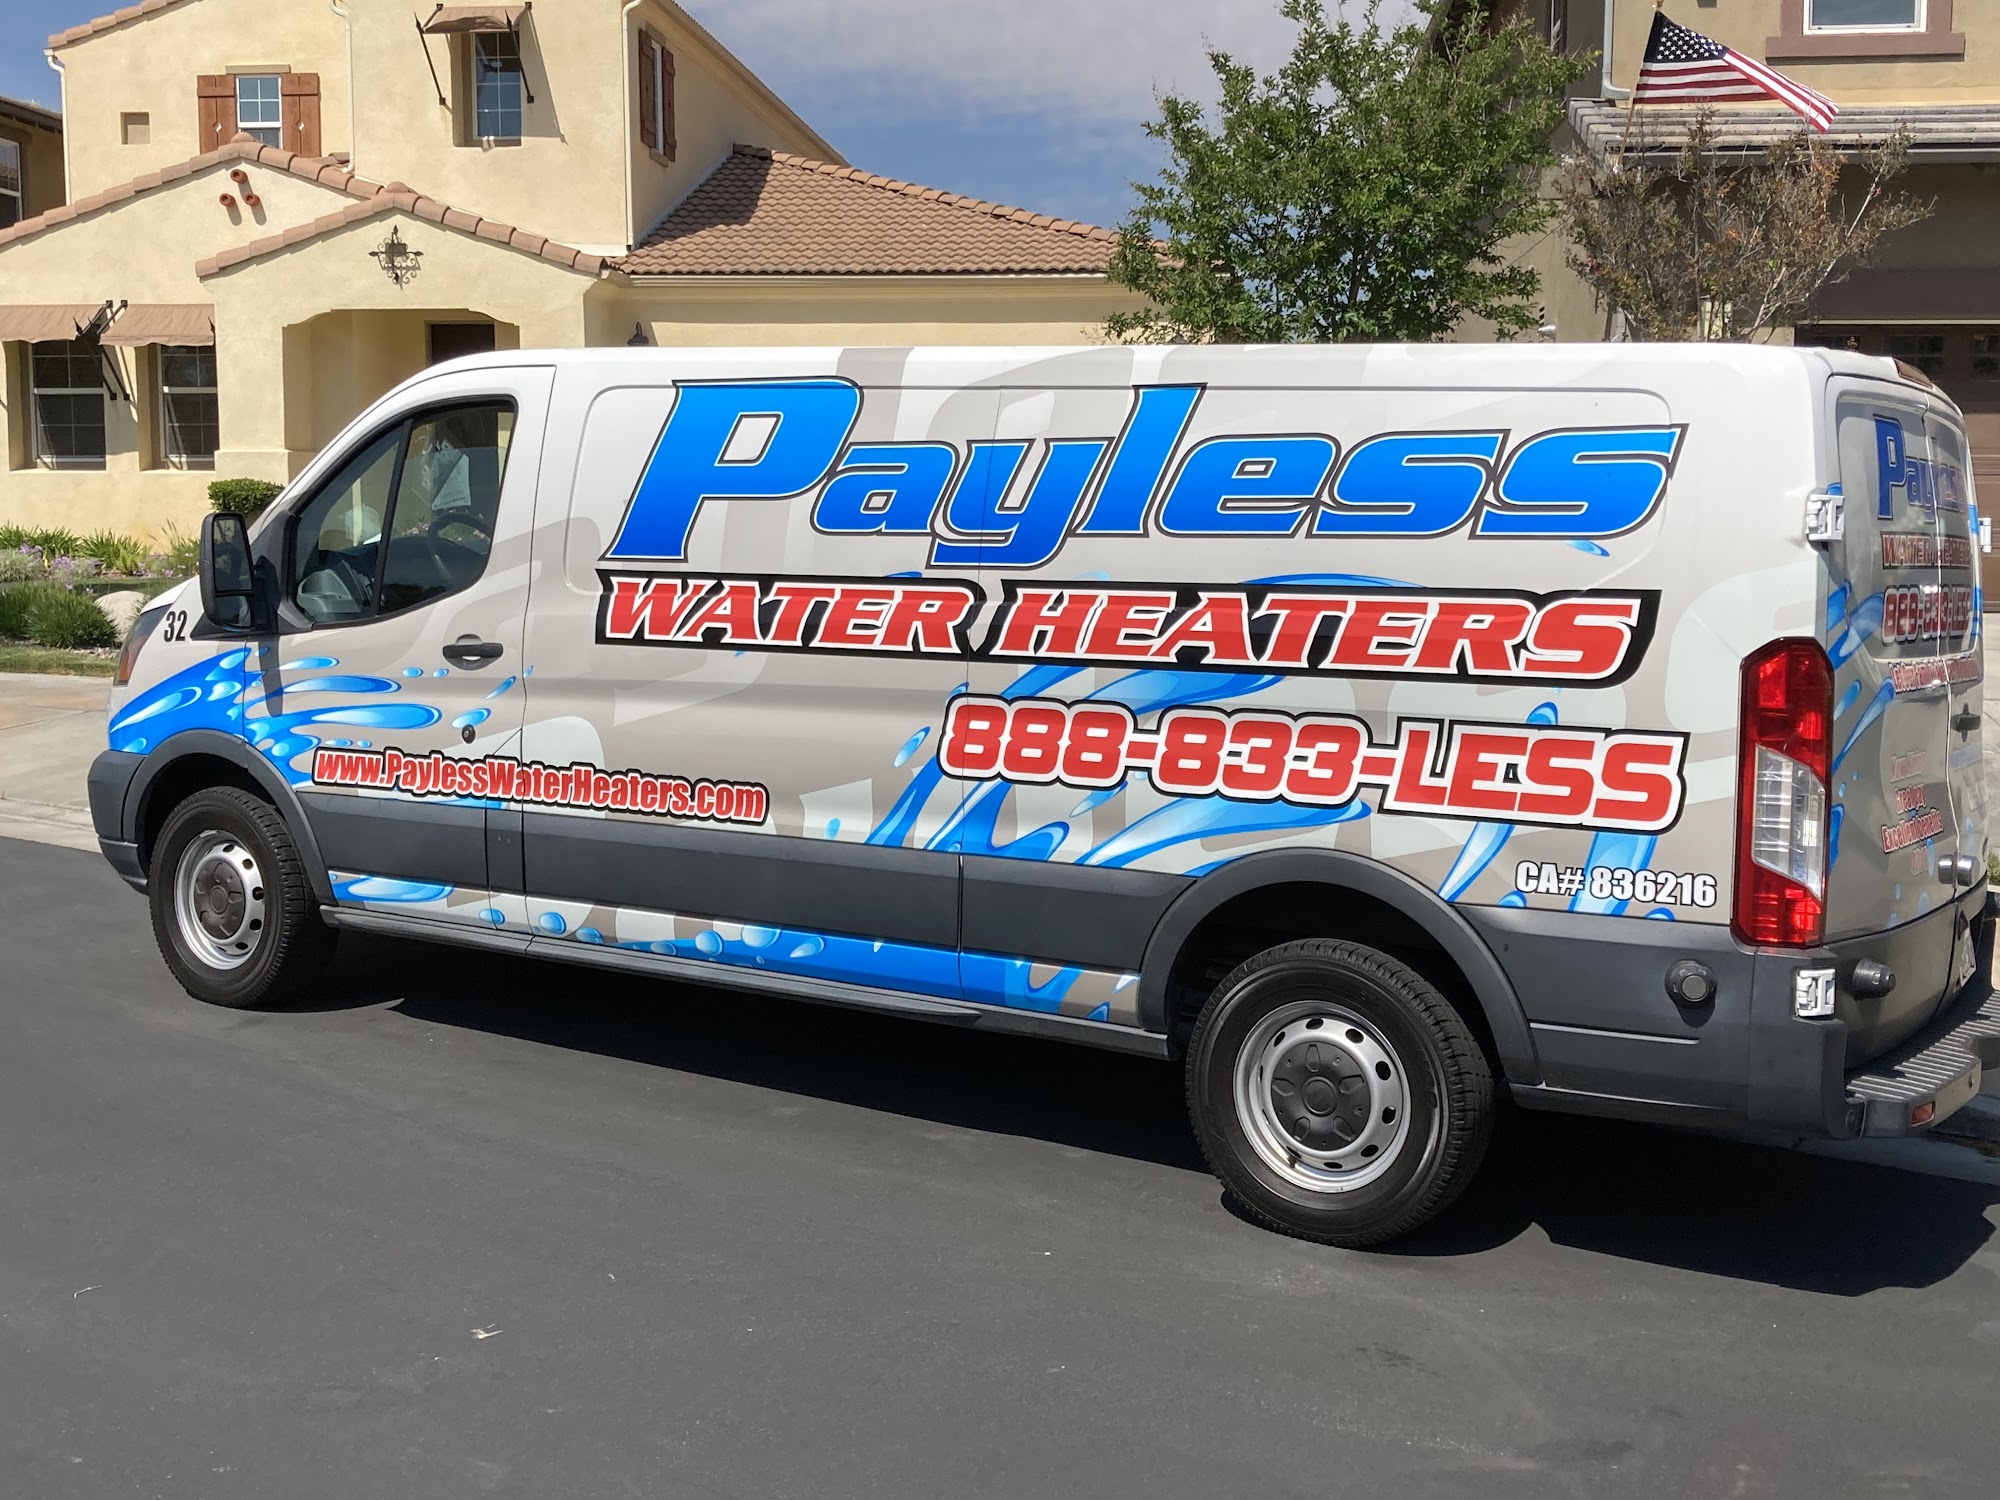 Payless Water Heaters & Tankless water heaters